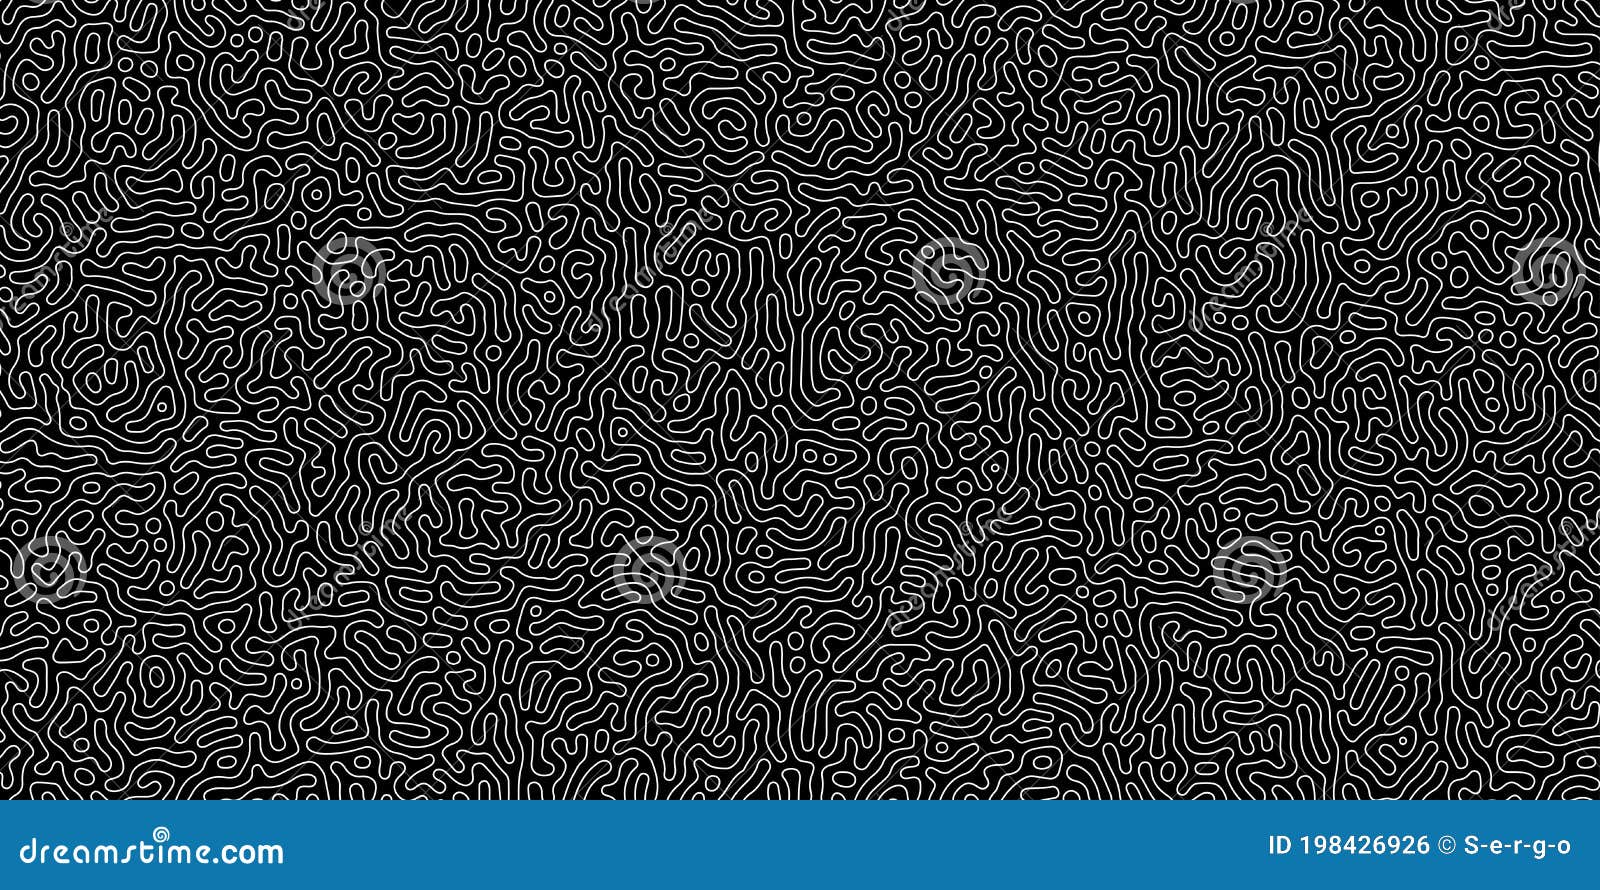 abstract turing background. camouflage black and white pattern. abstract line art background. .